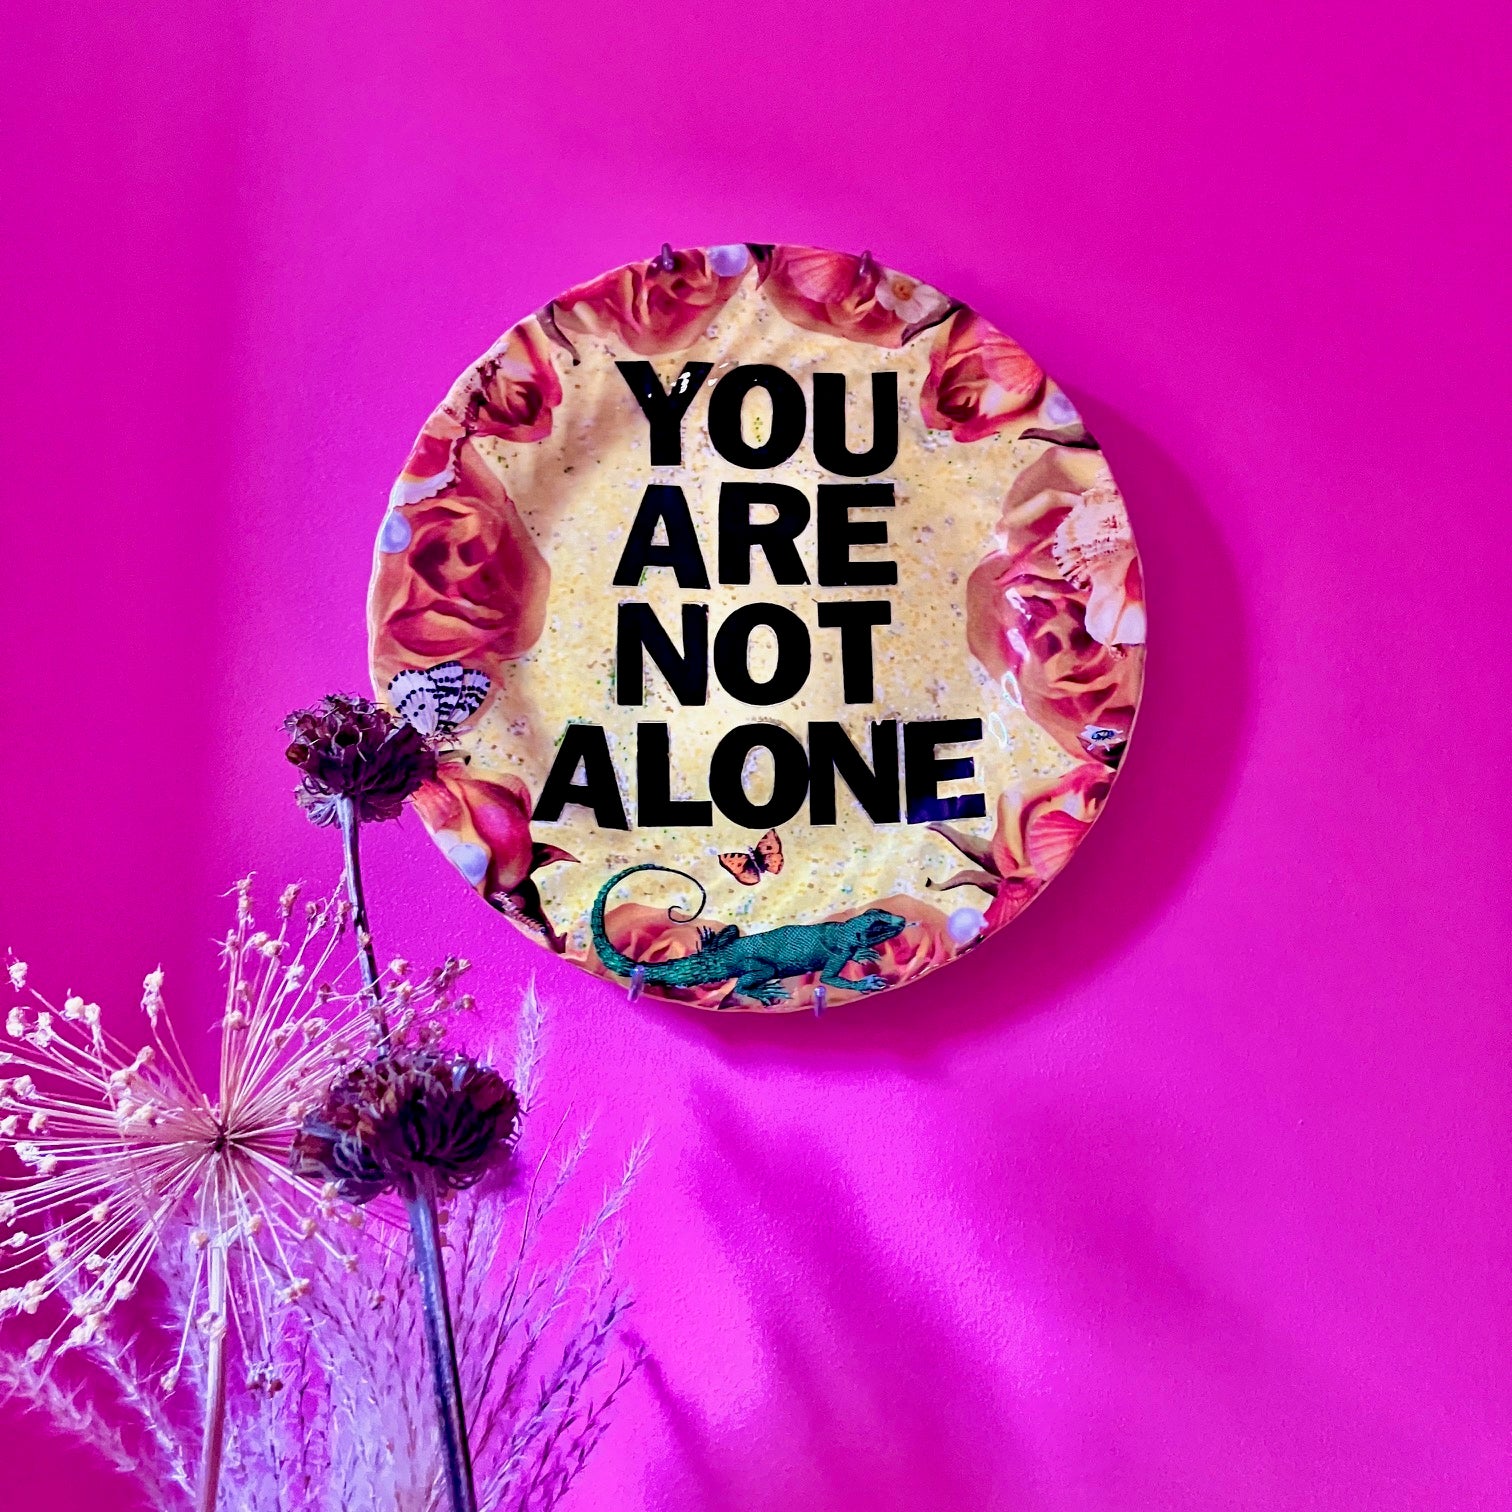 "You Are Not Alone" one-of-a-kind collage artwork Wall Plate by House of Frisson. Featuring the words "You Are Not Alone" framed by roses, pearls, and moths, on a yellow background. Plate hanging on a pink wall.